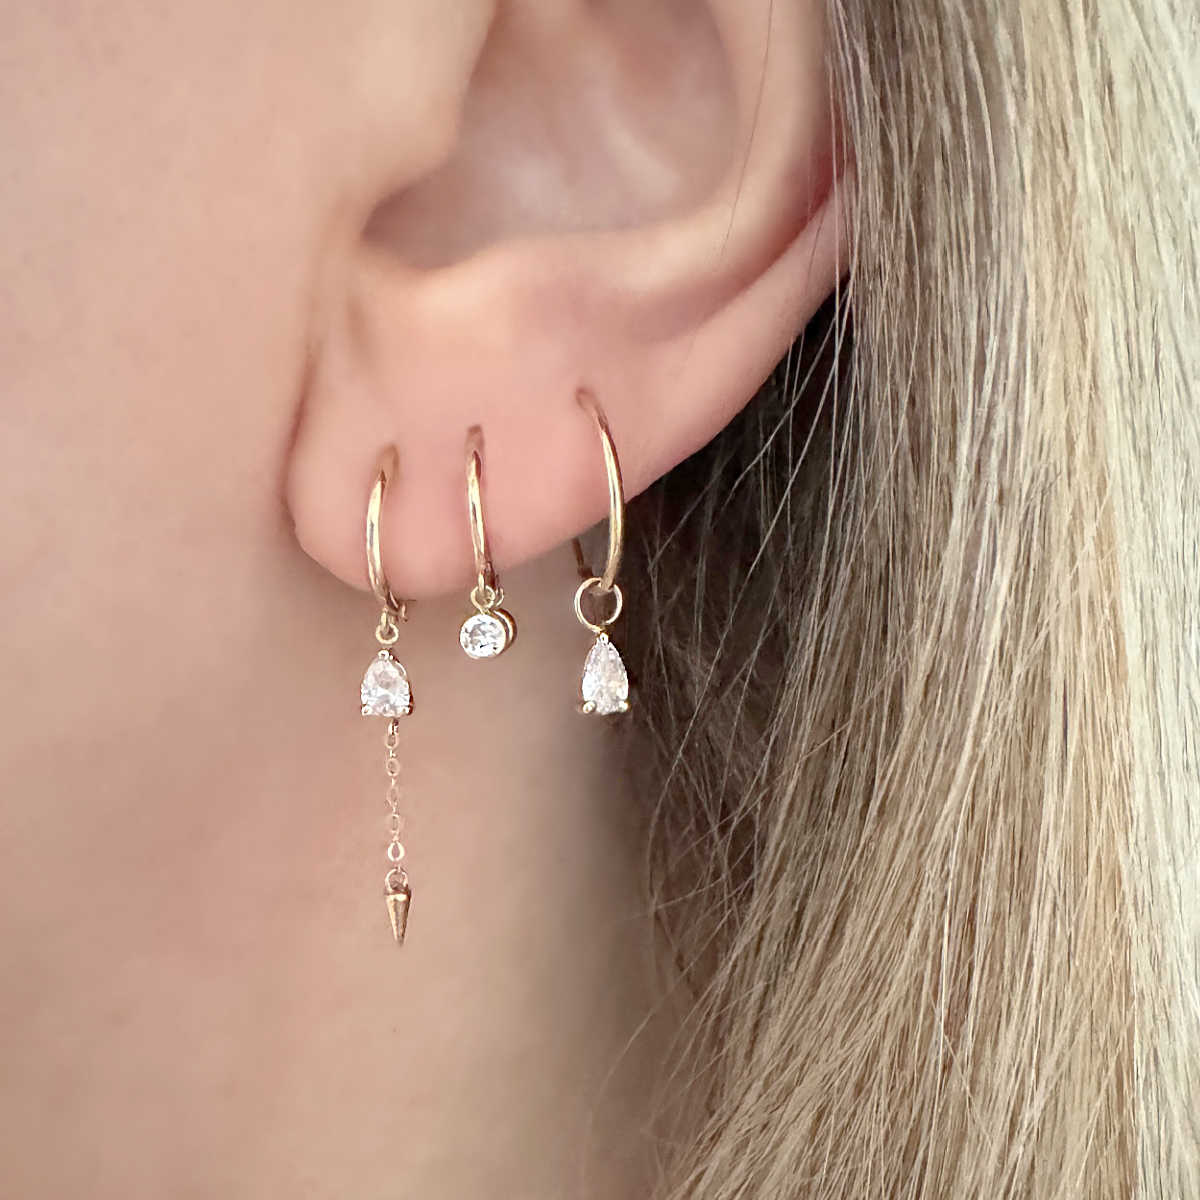 Huggie Earrings with Charms on Model | 14k Gold Cartilage Hoops from Two of Most